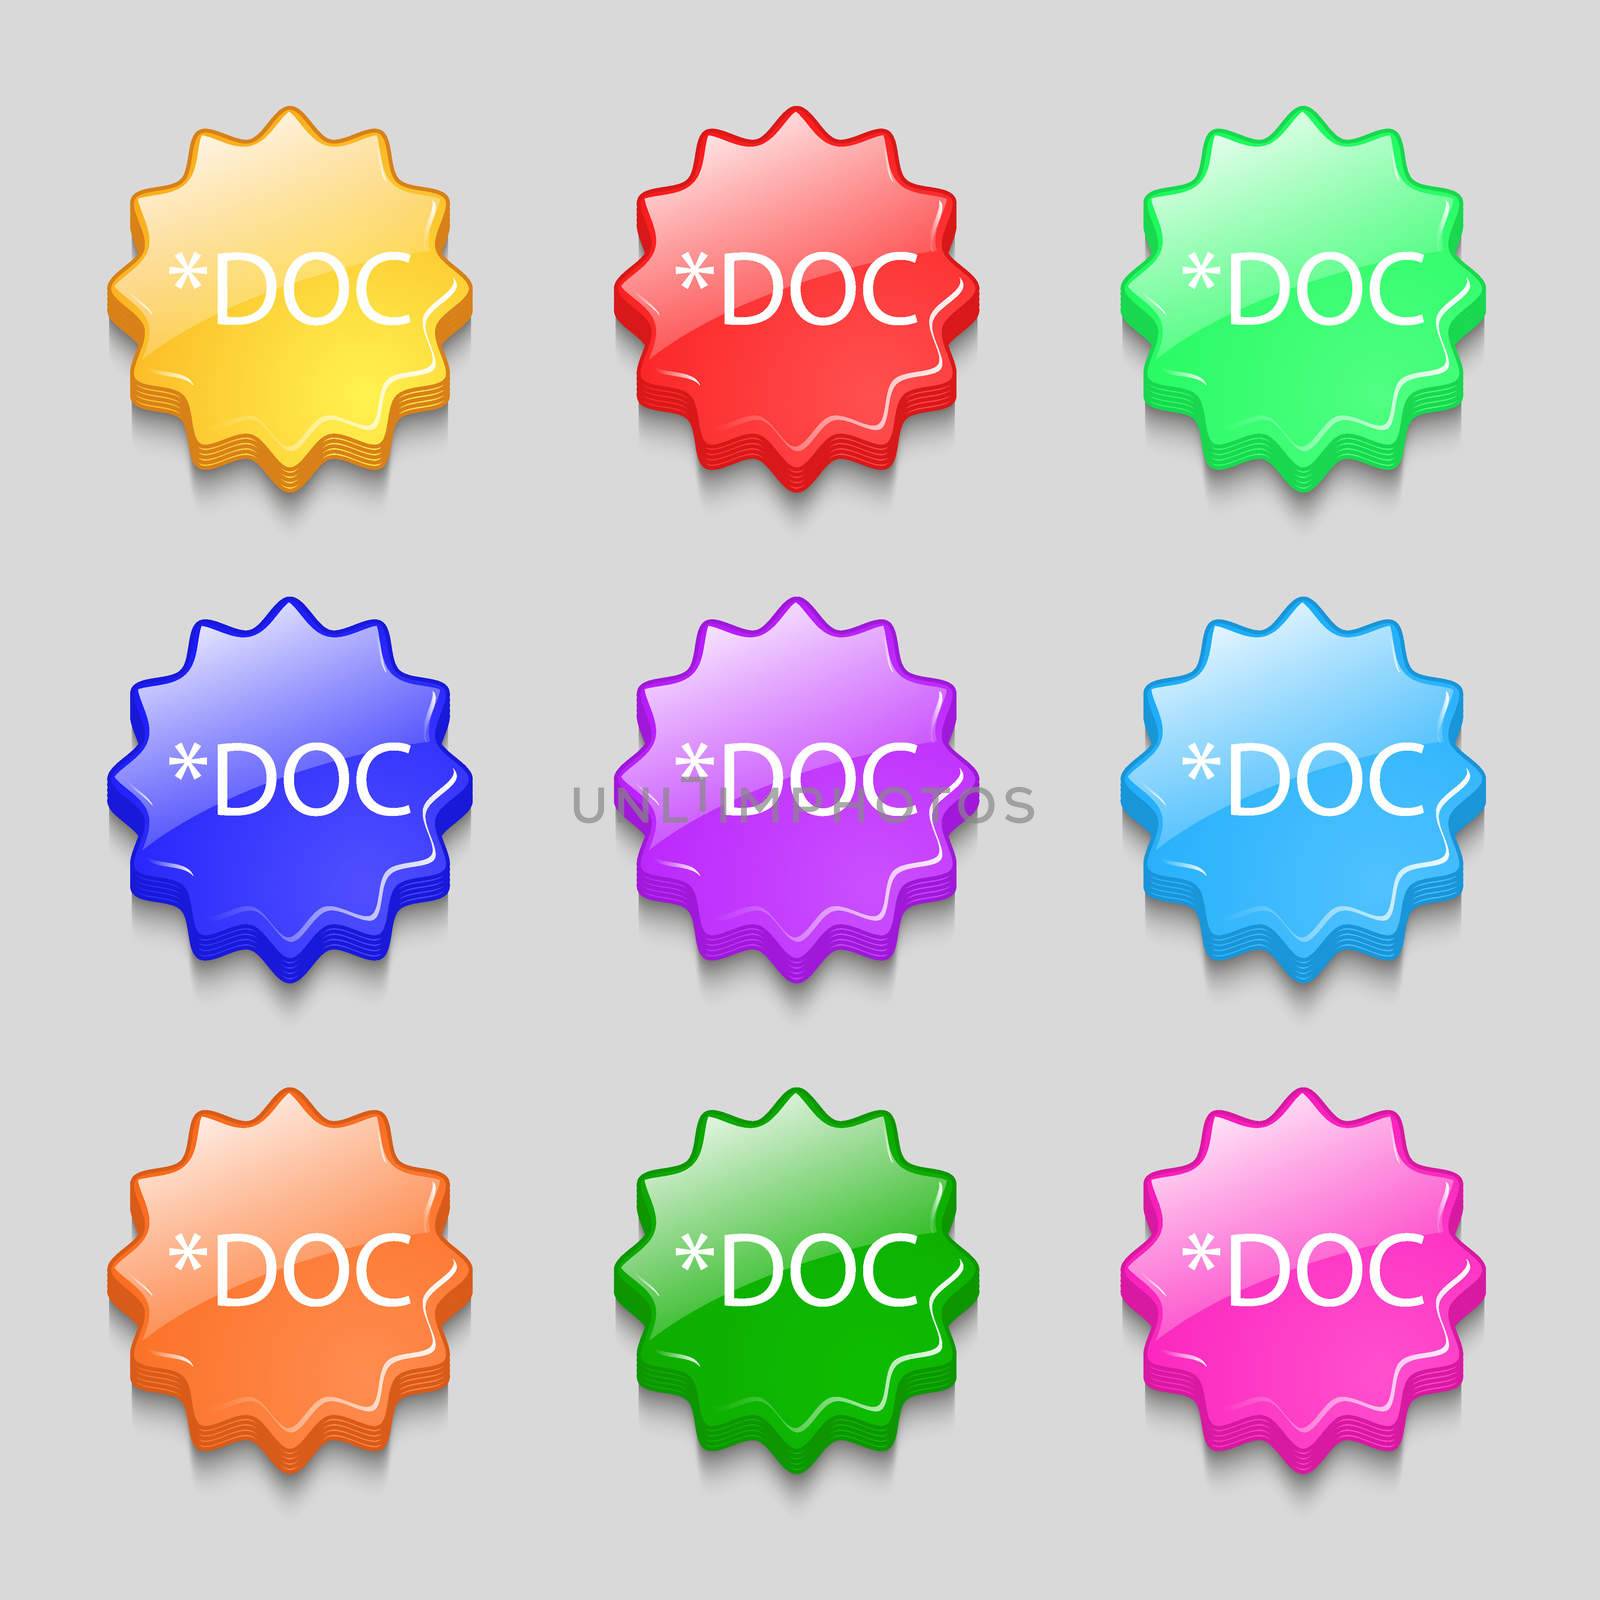 File document icon. Download doc button. Doc file extension symbol. Symbols on nine wavy colourful buttons. illustration